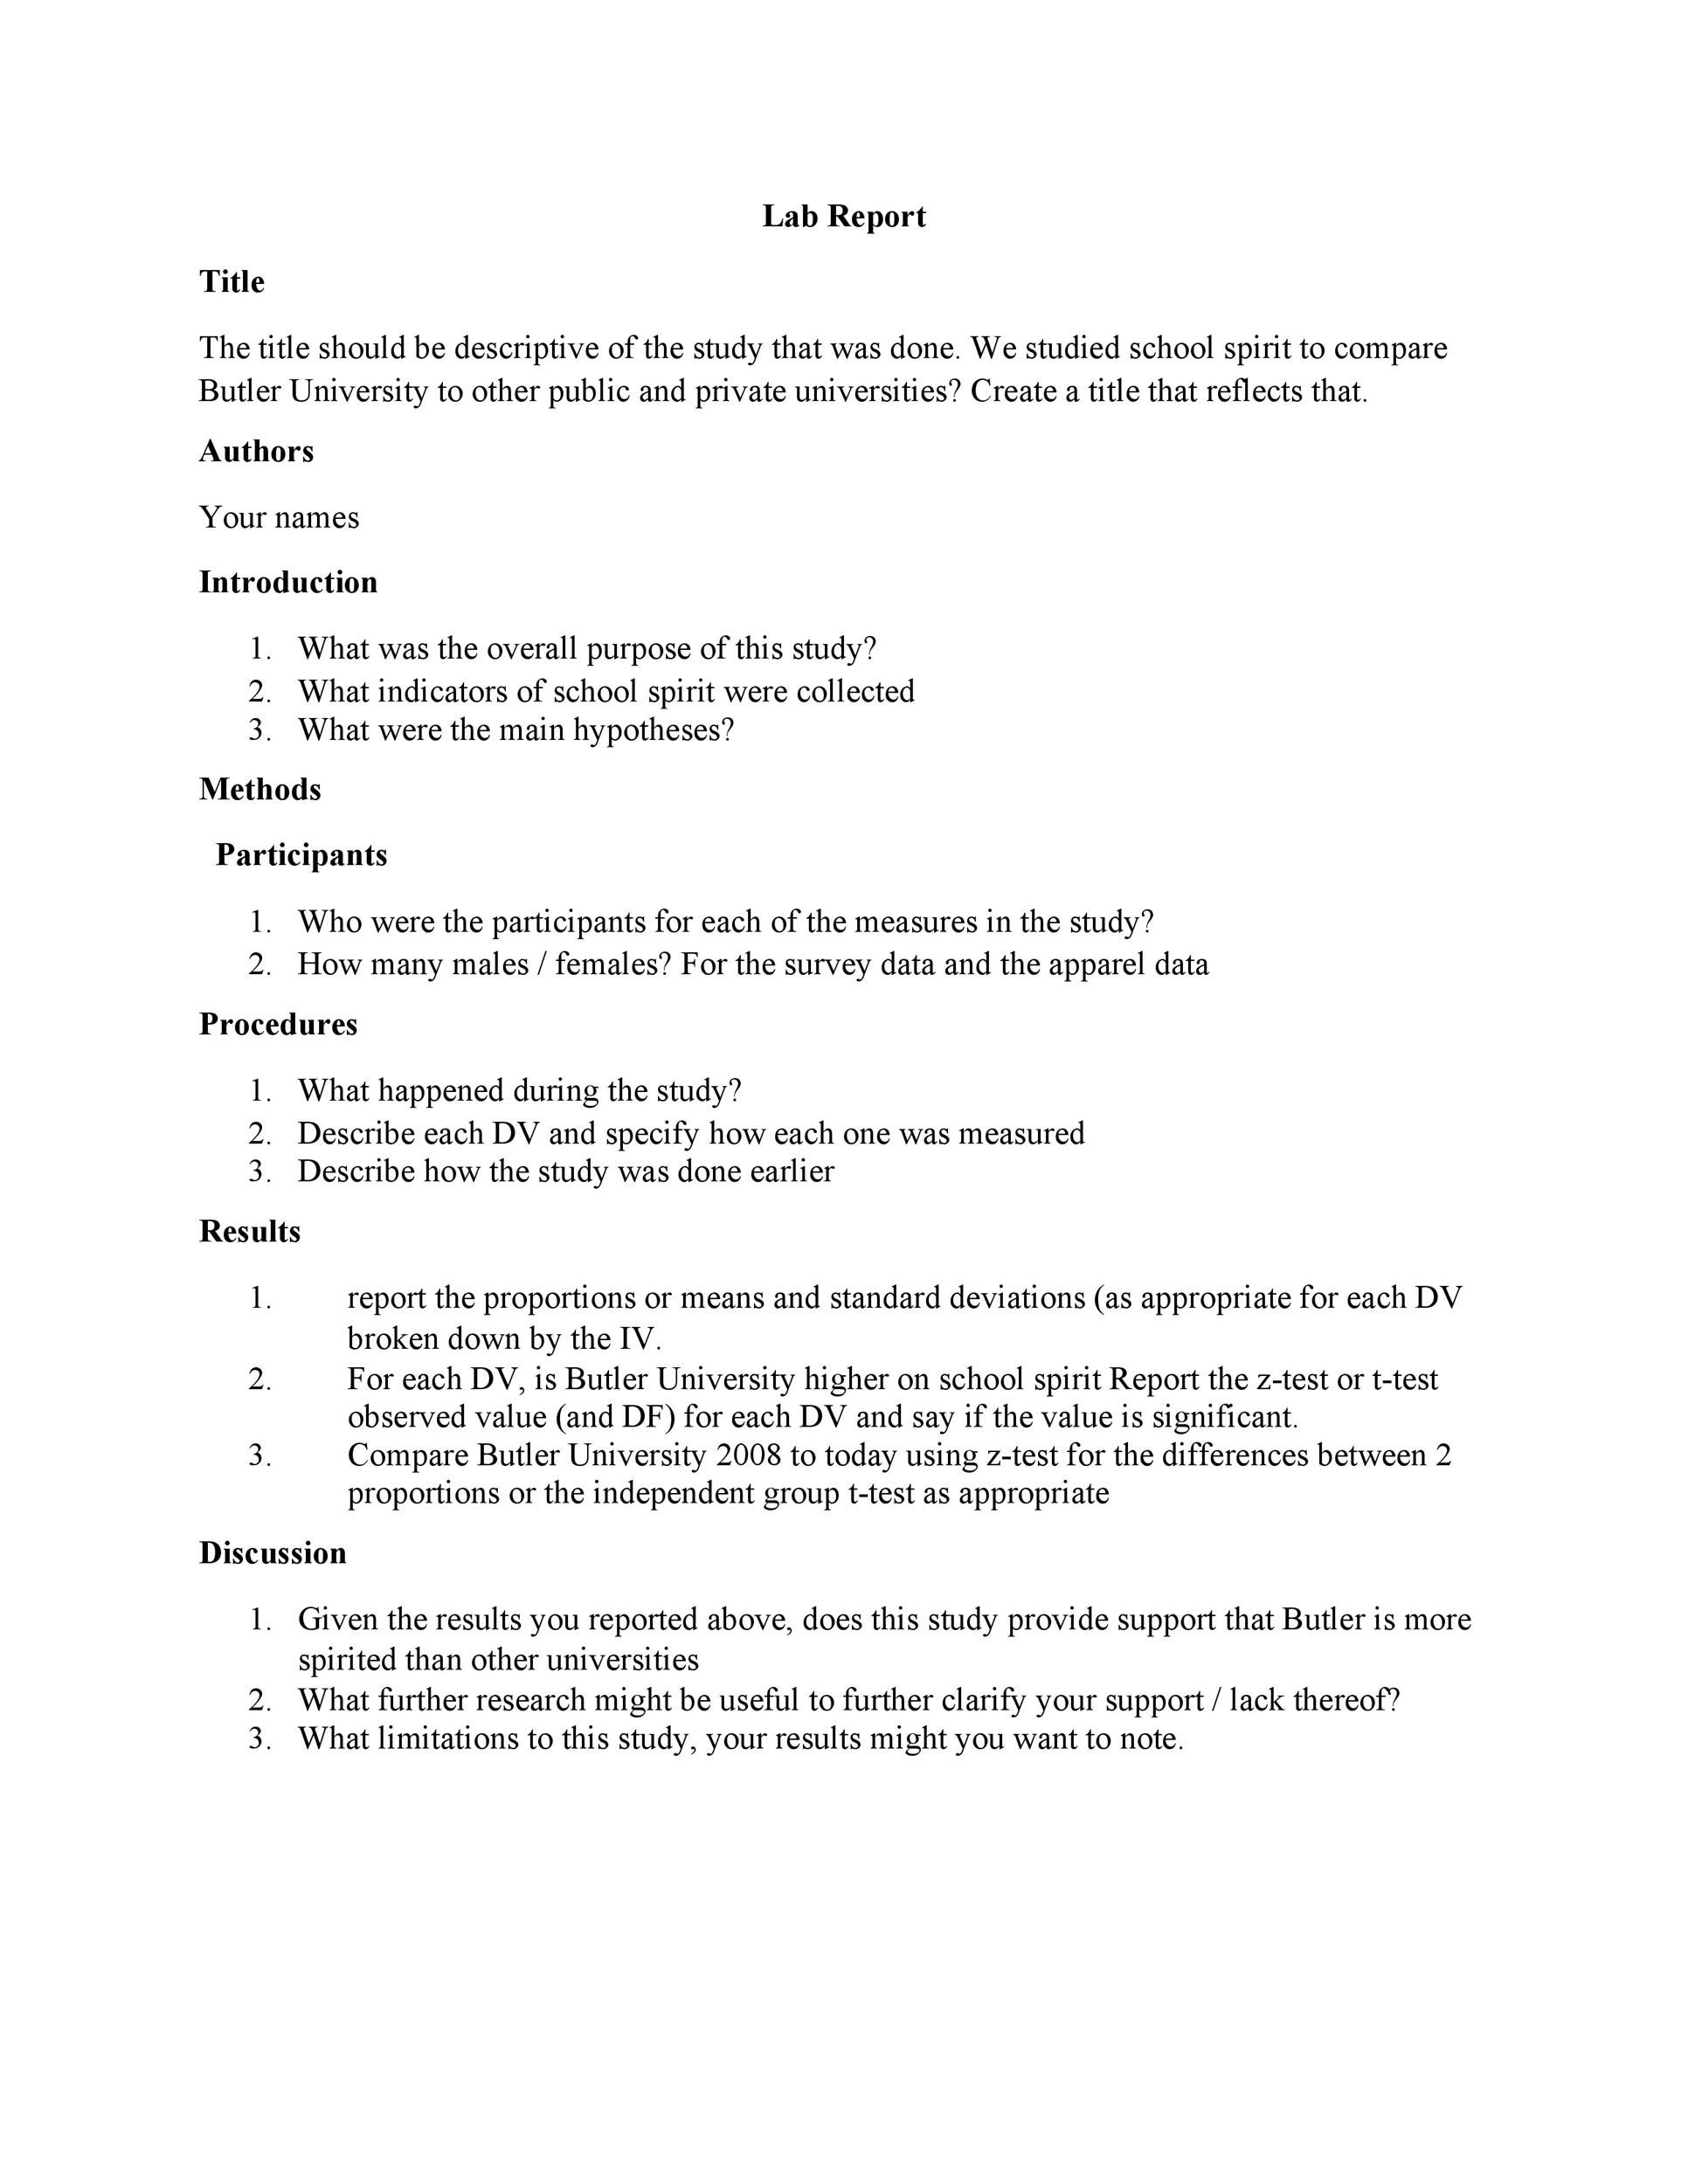 Free lab report template 34